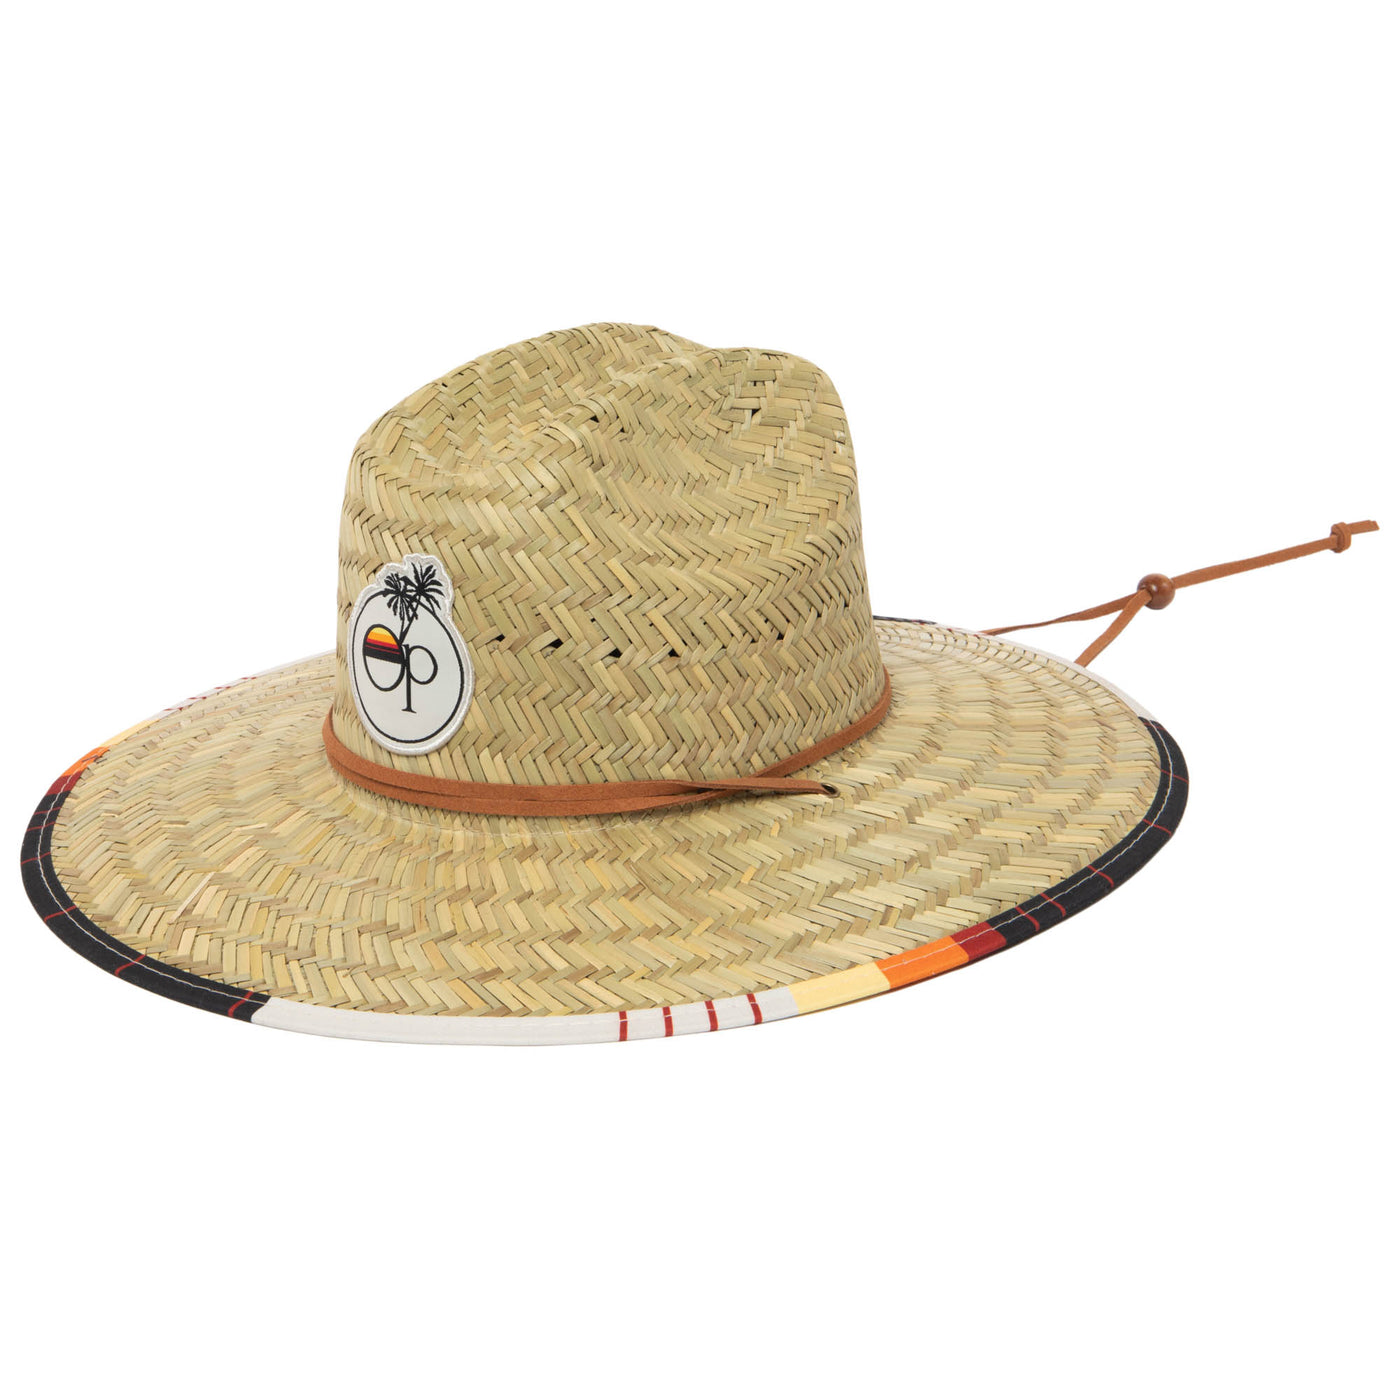 Original OP - Lifeguard Hat with Striped Underbrim Print by Ocean Pacific-LIFEGUARD-San Diego Hat Company